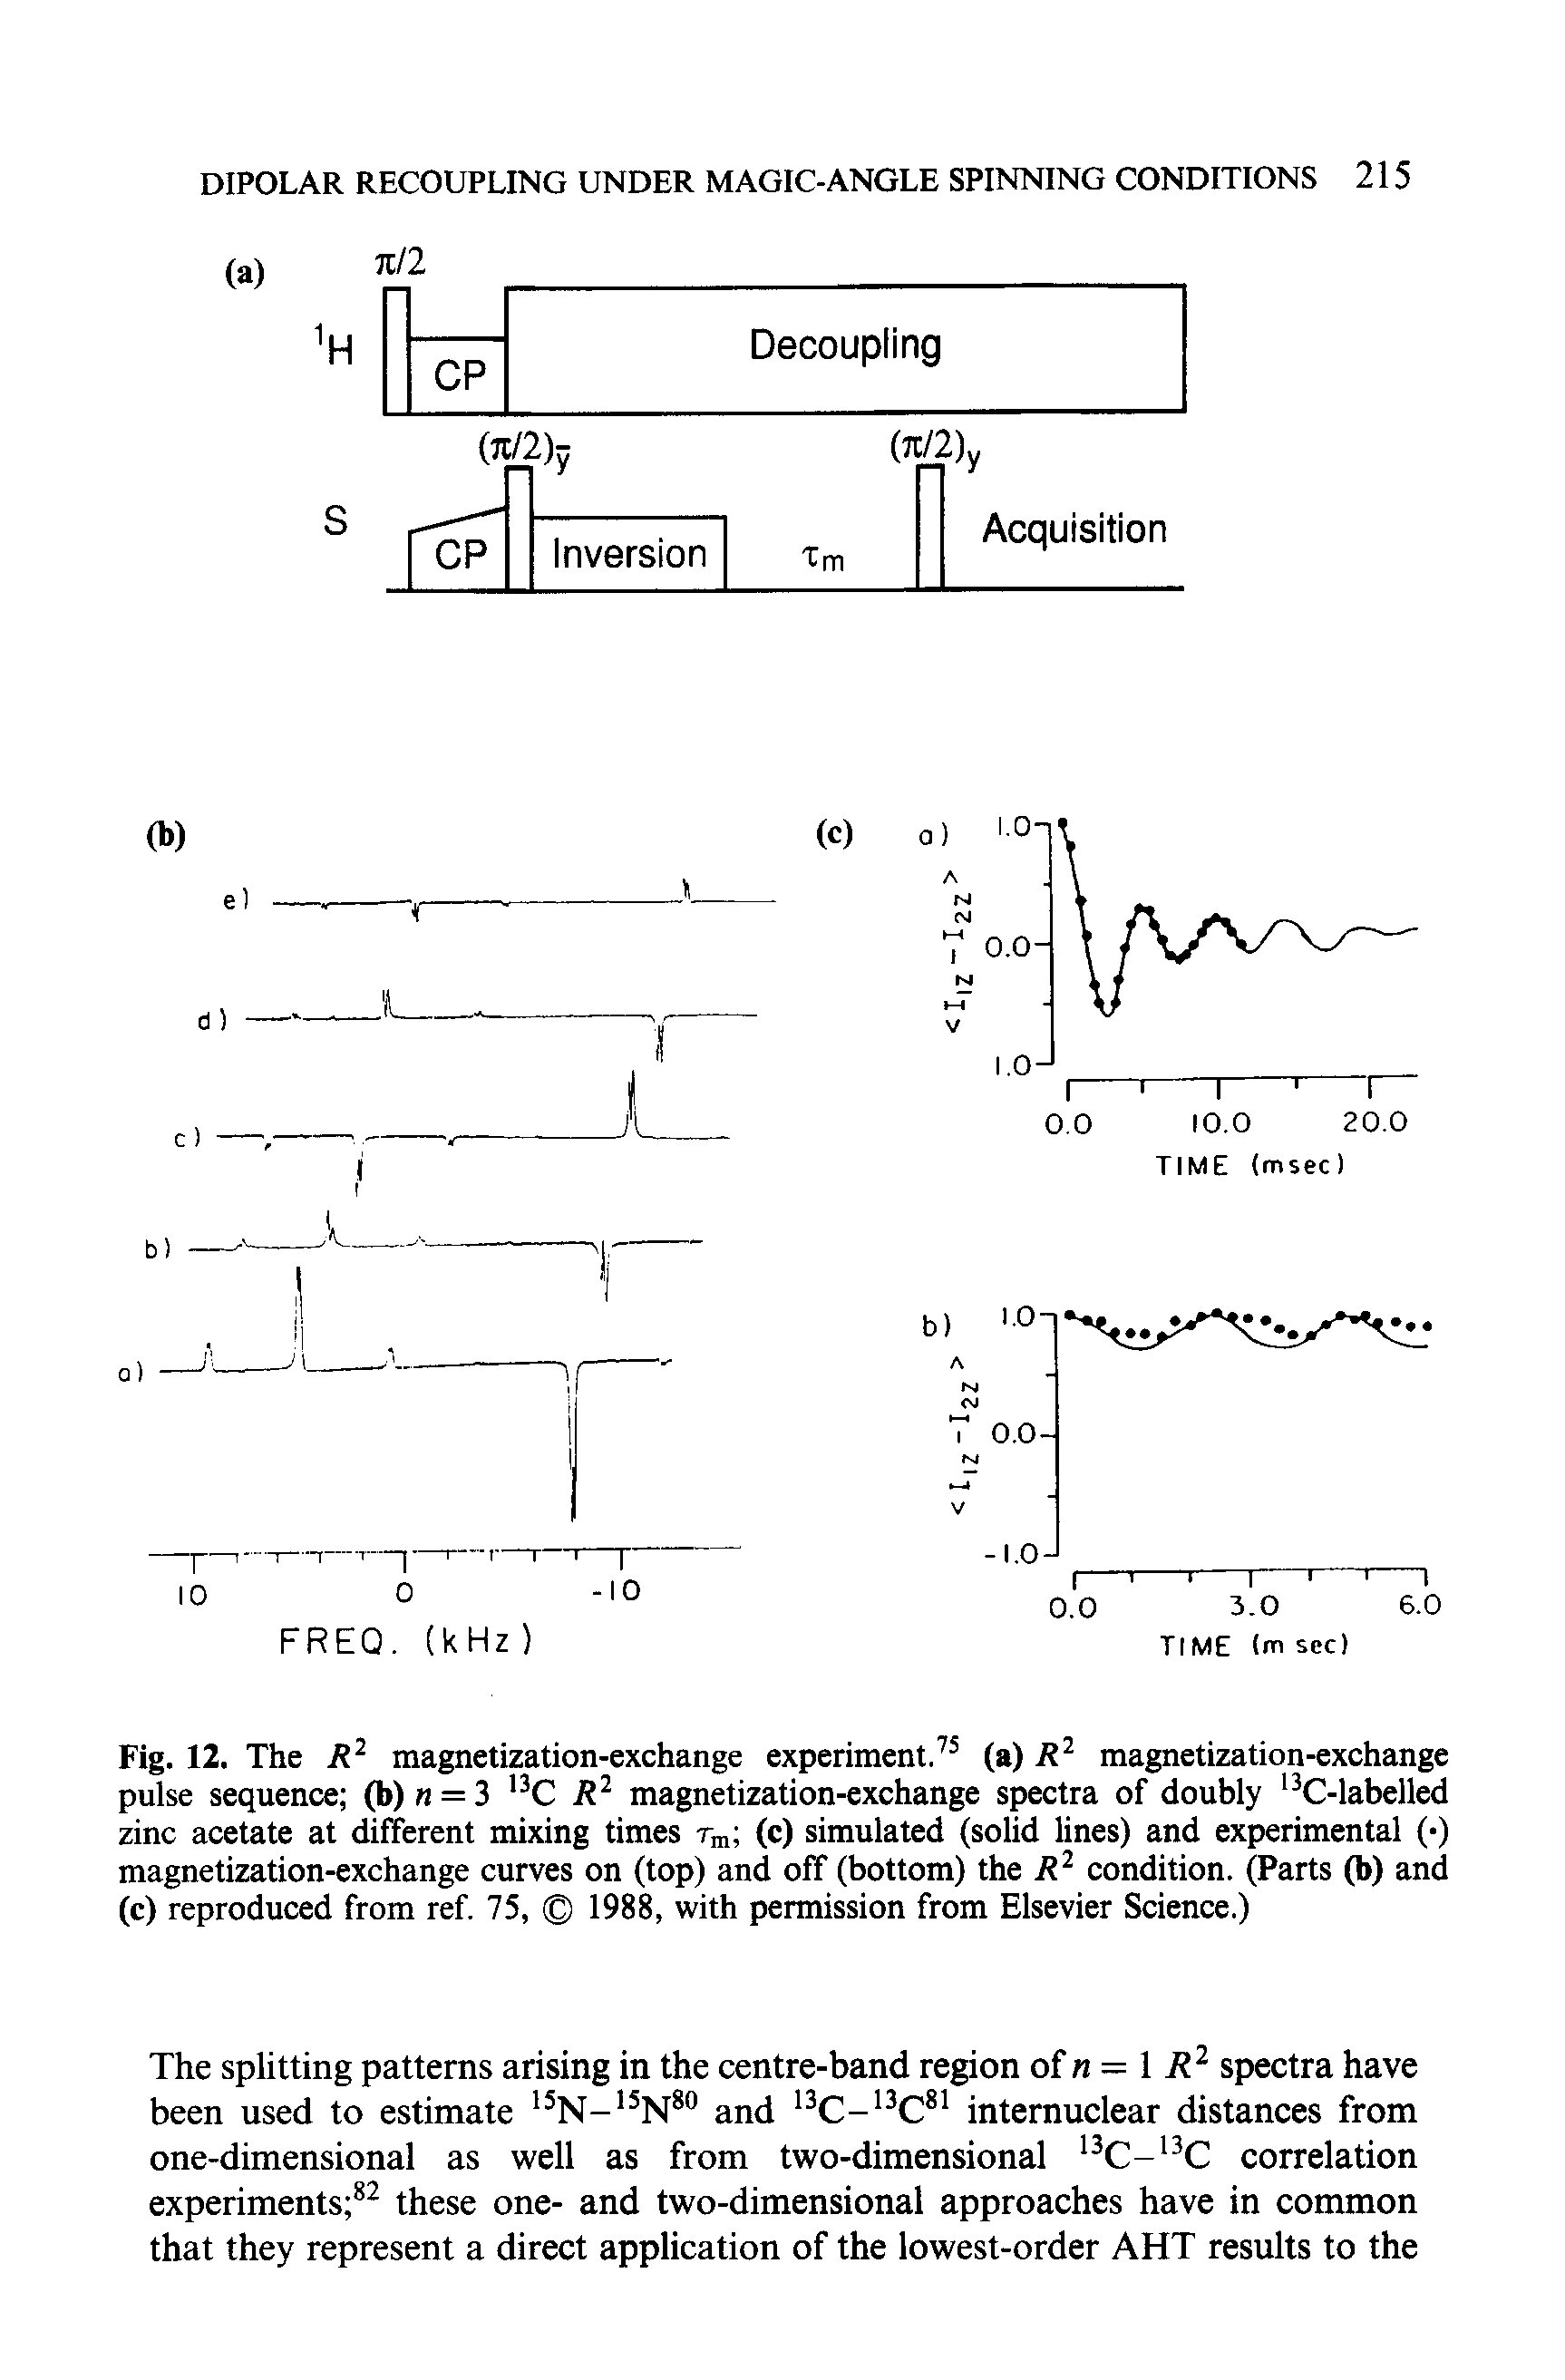 Fig. 12. The magnetization-exchange experiment.(a) magnetization-exchange pulse sequence (b) = 3 C magnetization-exchange spectra of doubly C-labelled zinc acetate at different mixing times Tm (c) simulated (solid lines) and experimental ( ) magnetization-exchange curves on (top) and off (bottom) the R condition. (Parts (b) and (c) reproduced from ref. 75, 1988, with permission from Elsevier Science.)...